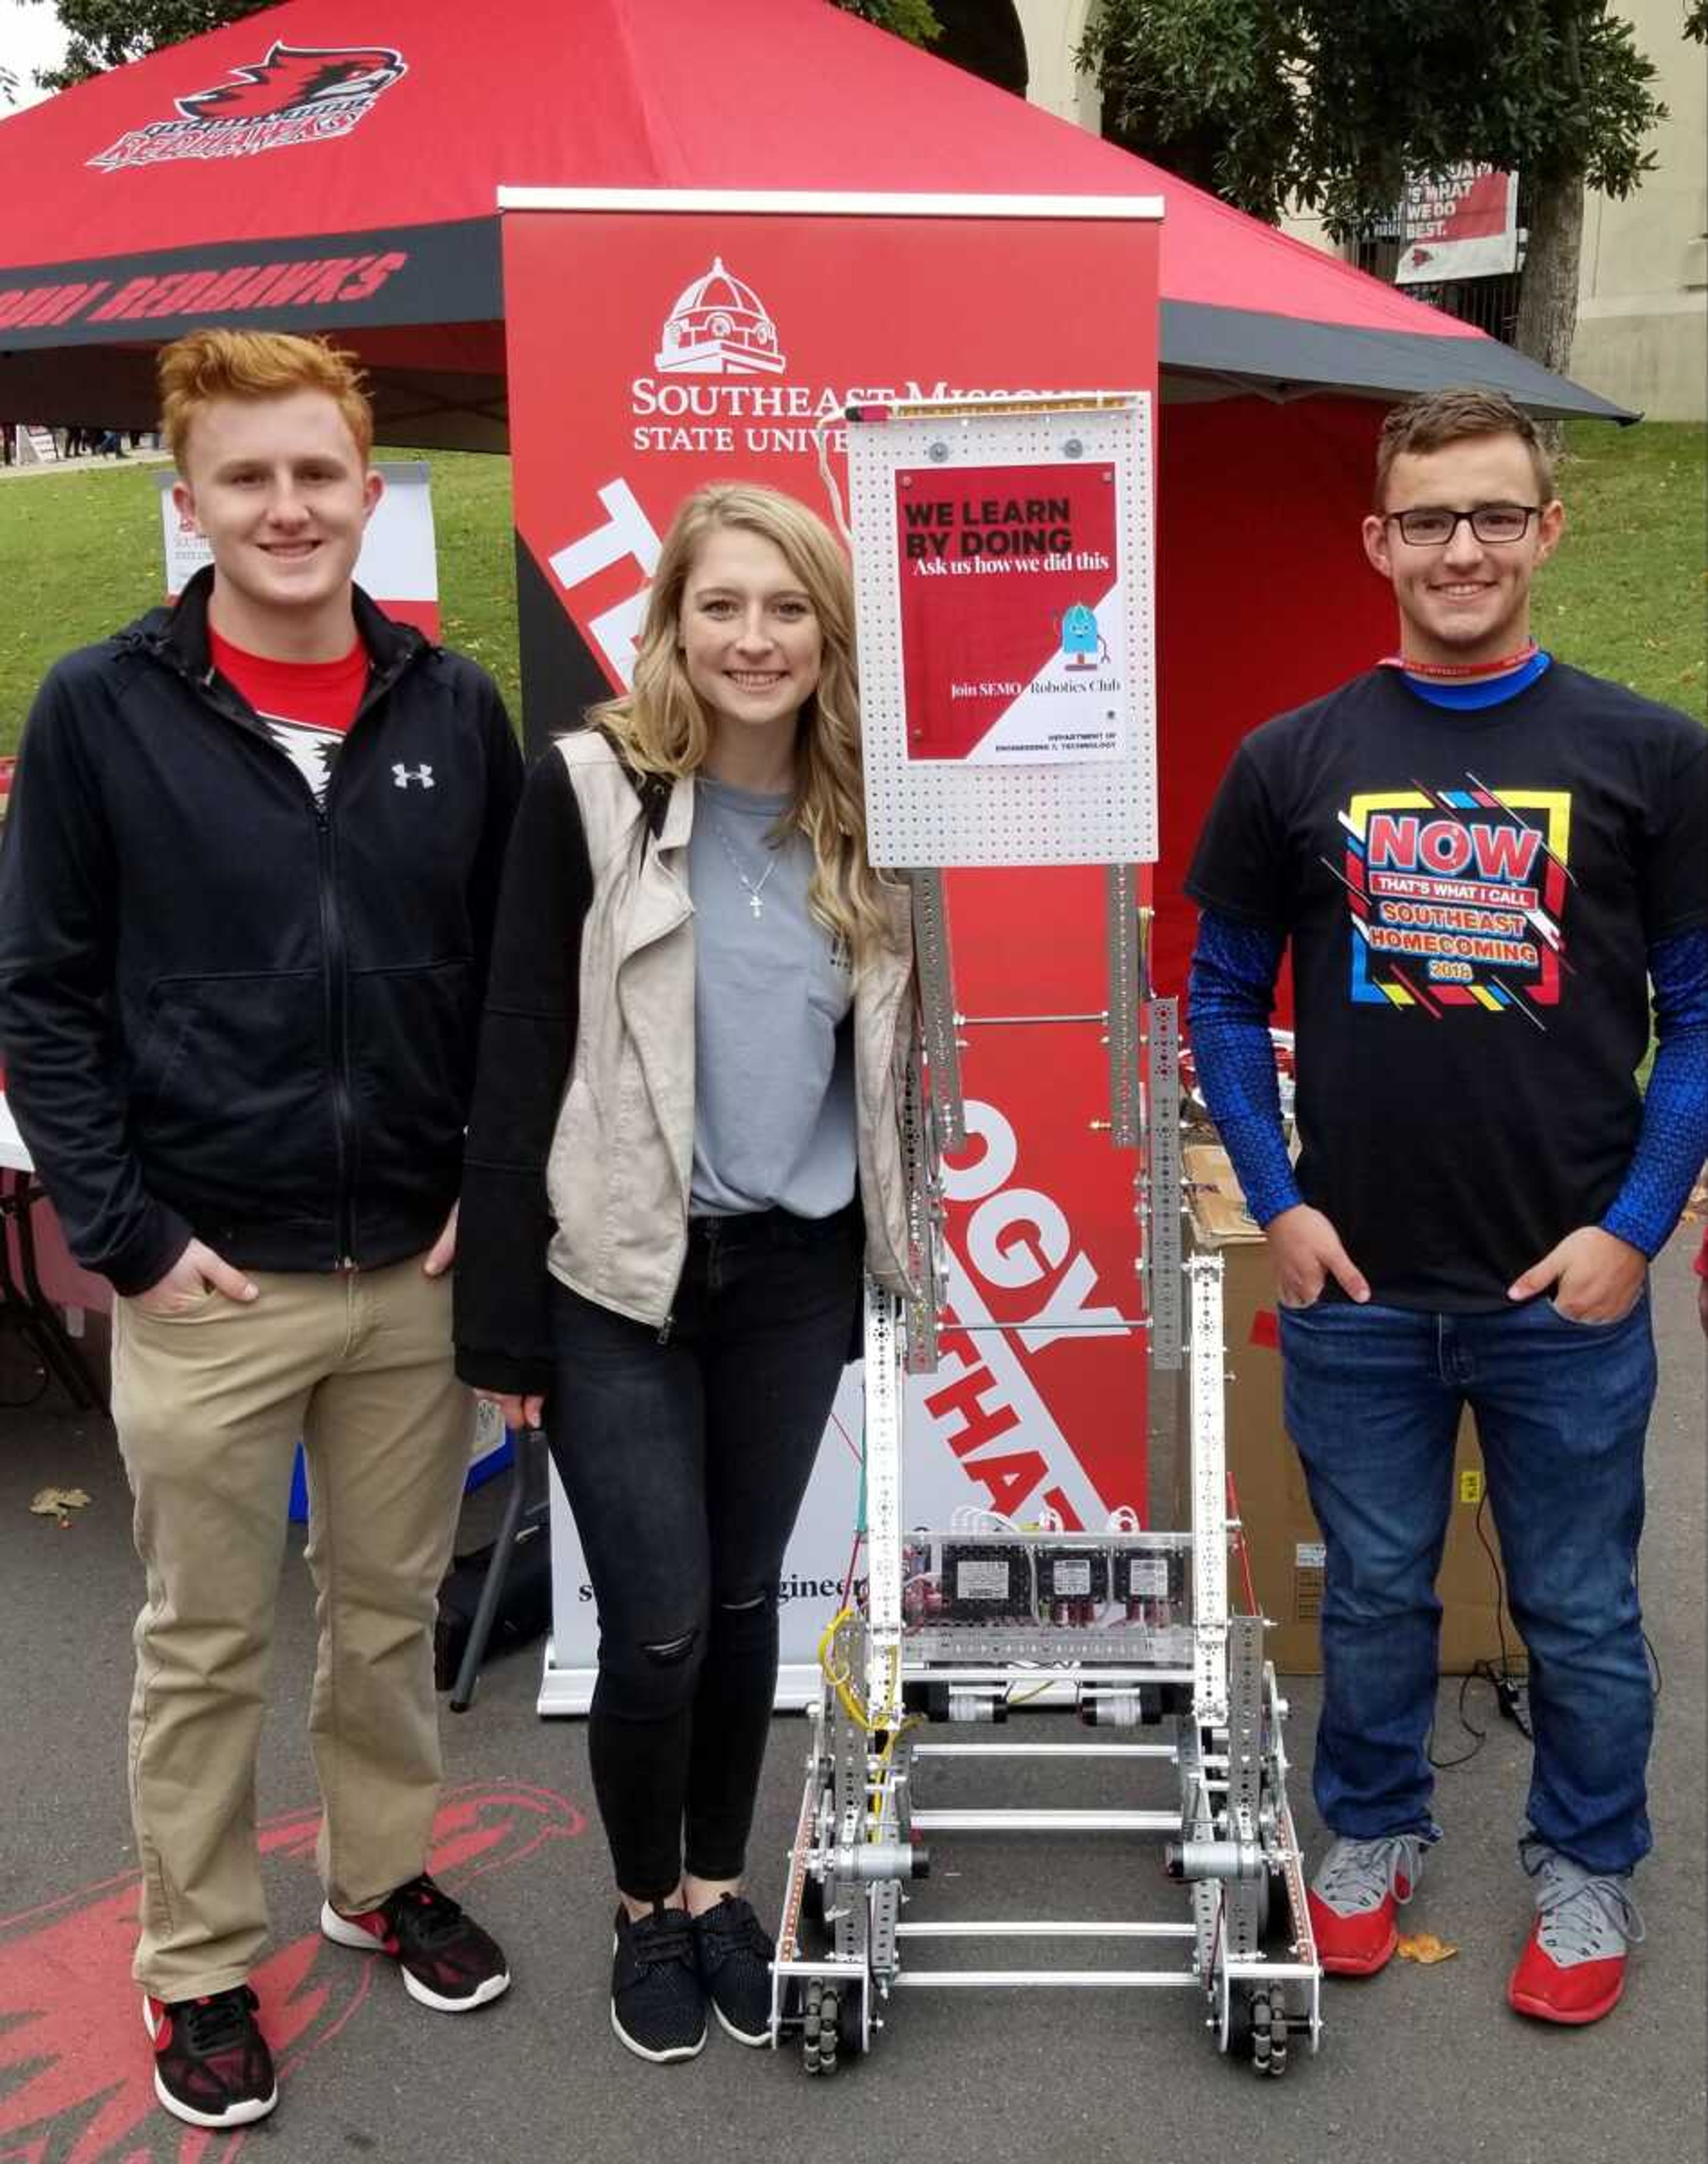 Robotics club officers Nathan McKlin (UAS major); Hannah Seyer (Technology Management major); Brigham Haase (UAS major) standing with their robot during homecoming.